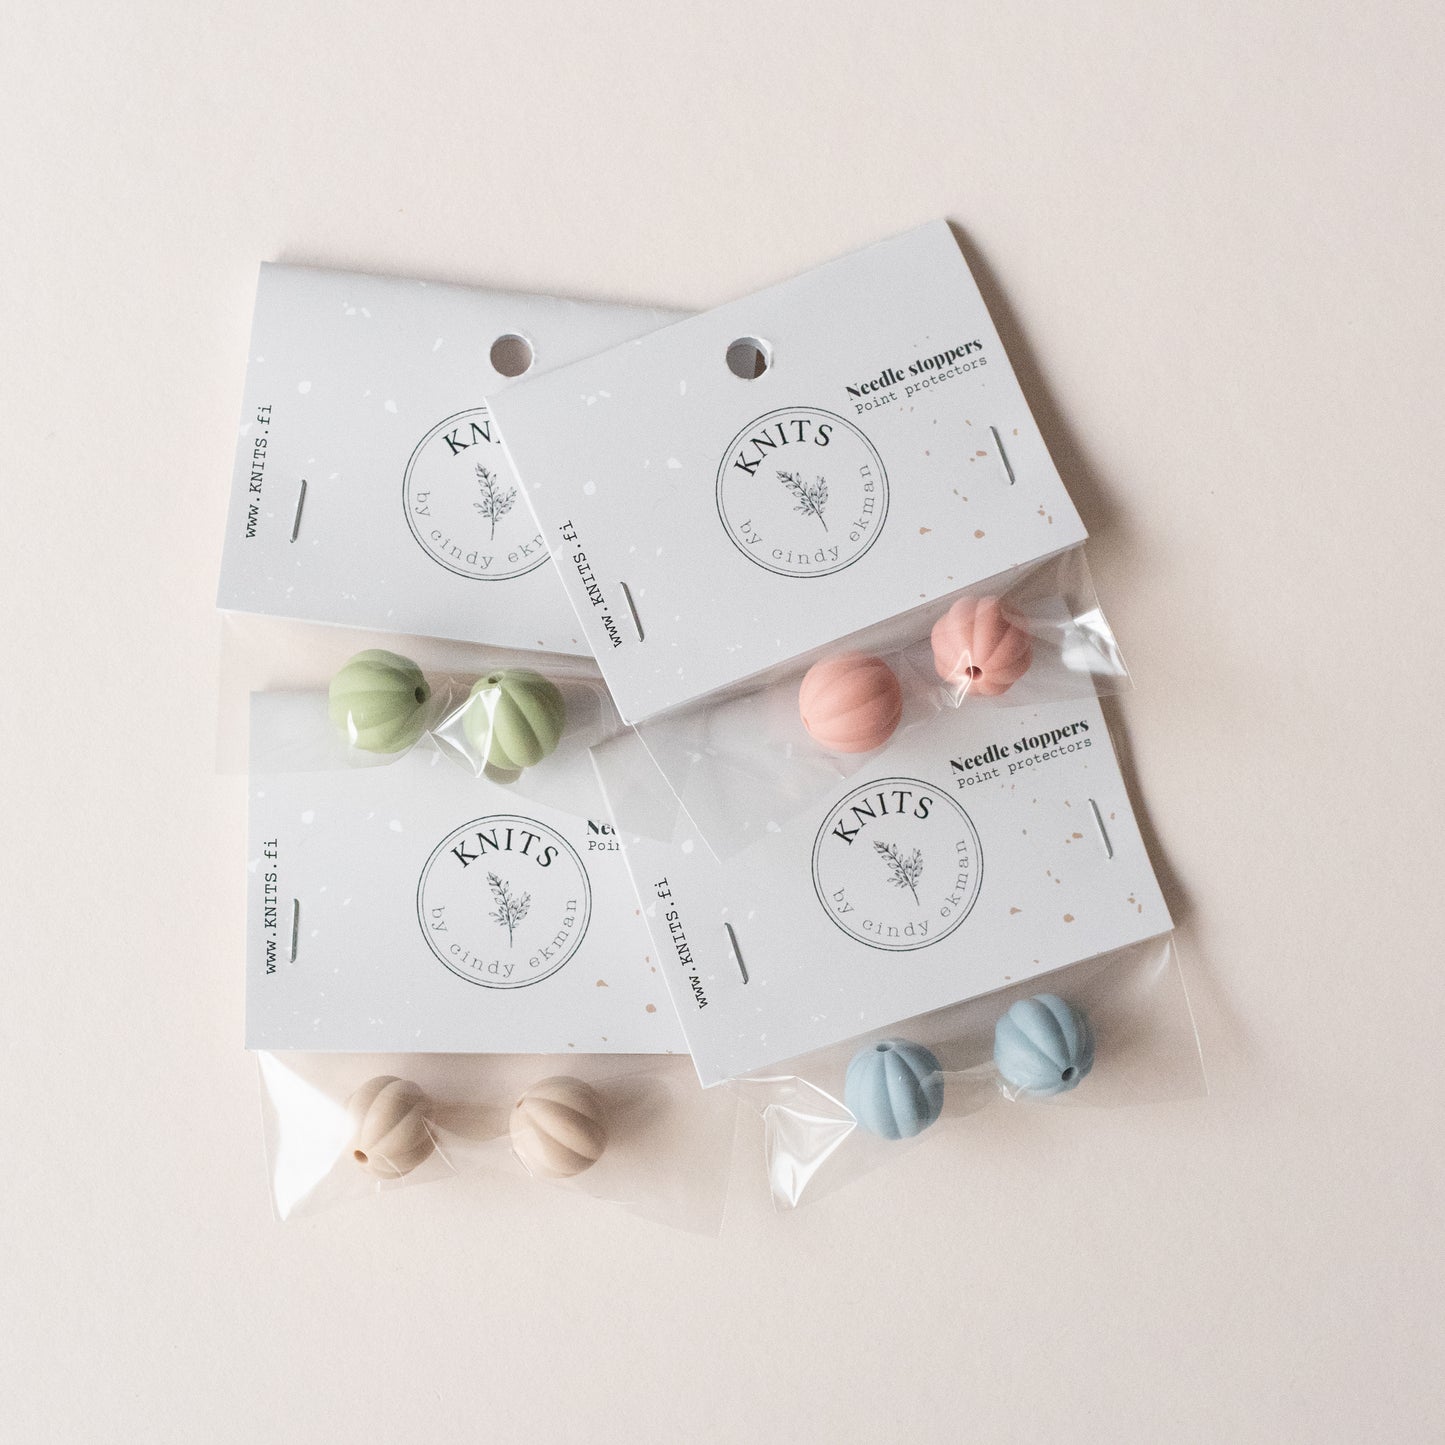 Needle stoppers - bell KNITS by cindy ekman